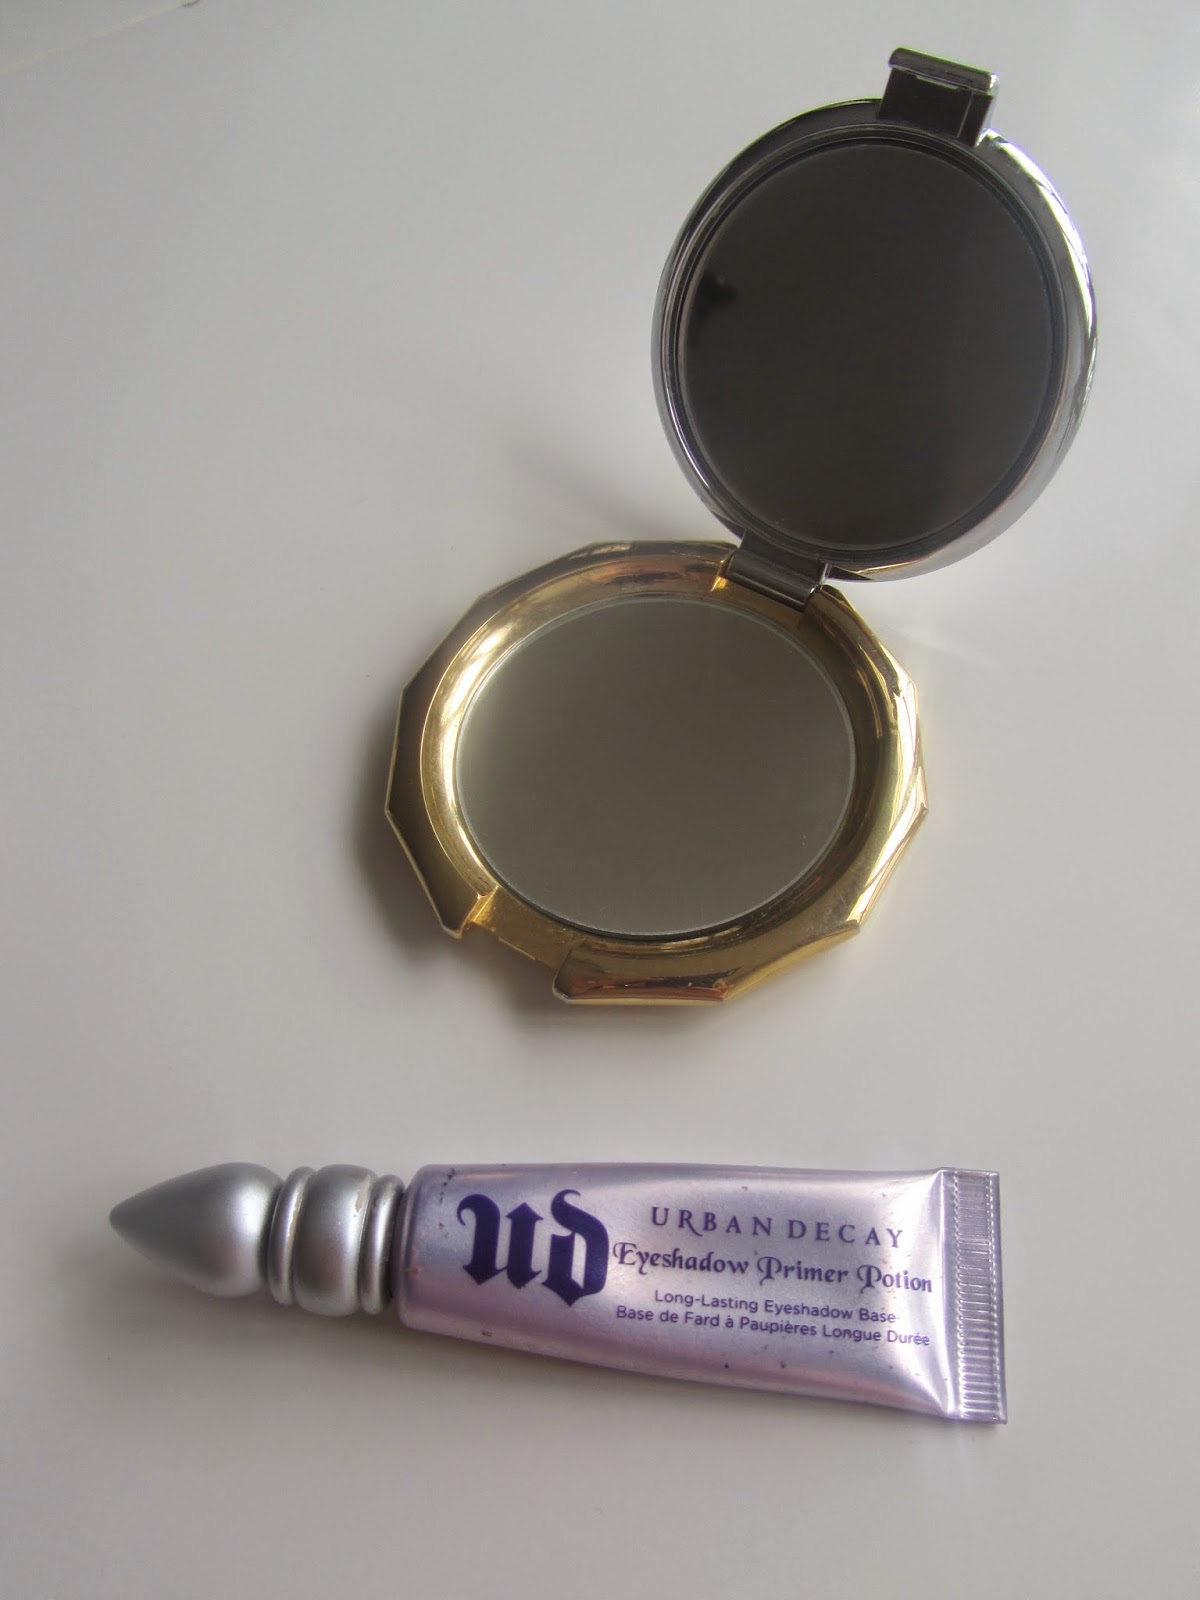 My Review on Urban Decay Eyeshadow Primer Potion